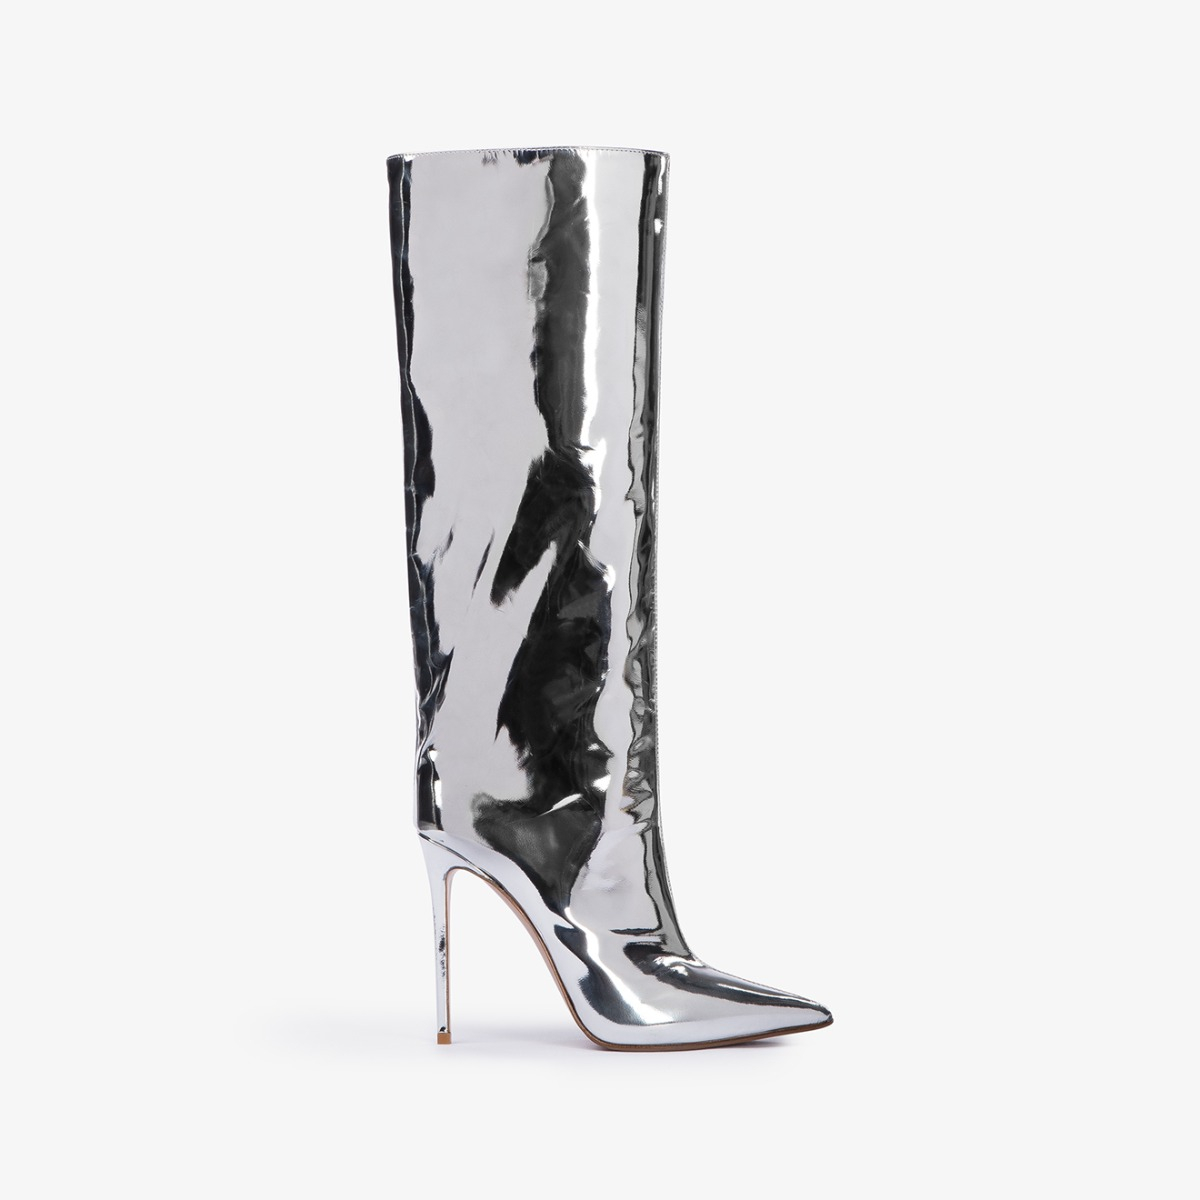 EVA BOOT 120 mm - Le Silla | Official Online Store